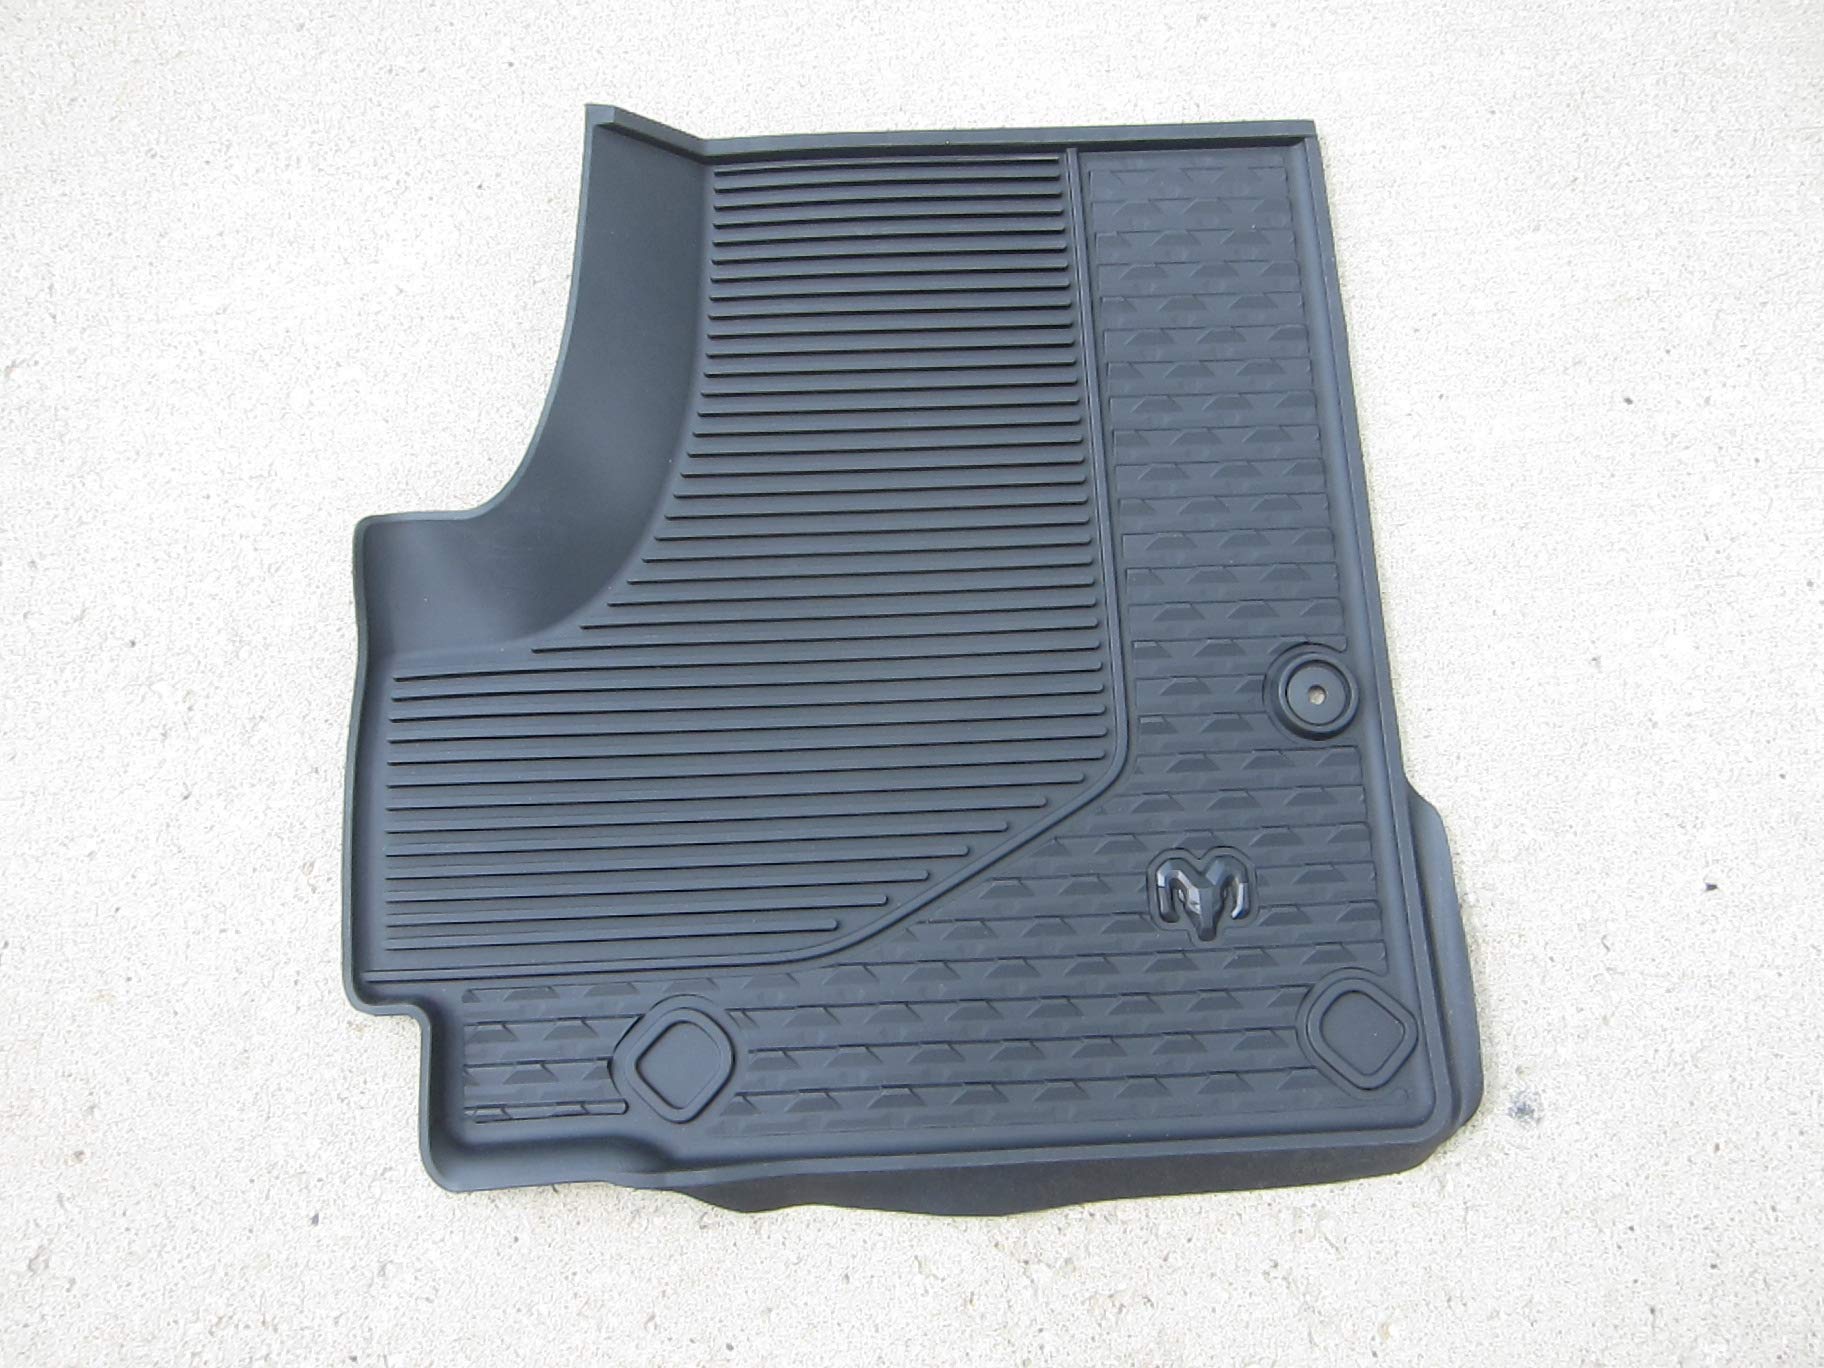 Ram 1500 DT (New Body Style) Crew Cab All Weather Mats New Mopar OEM